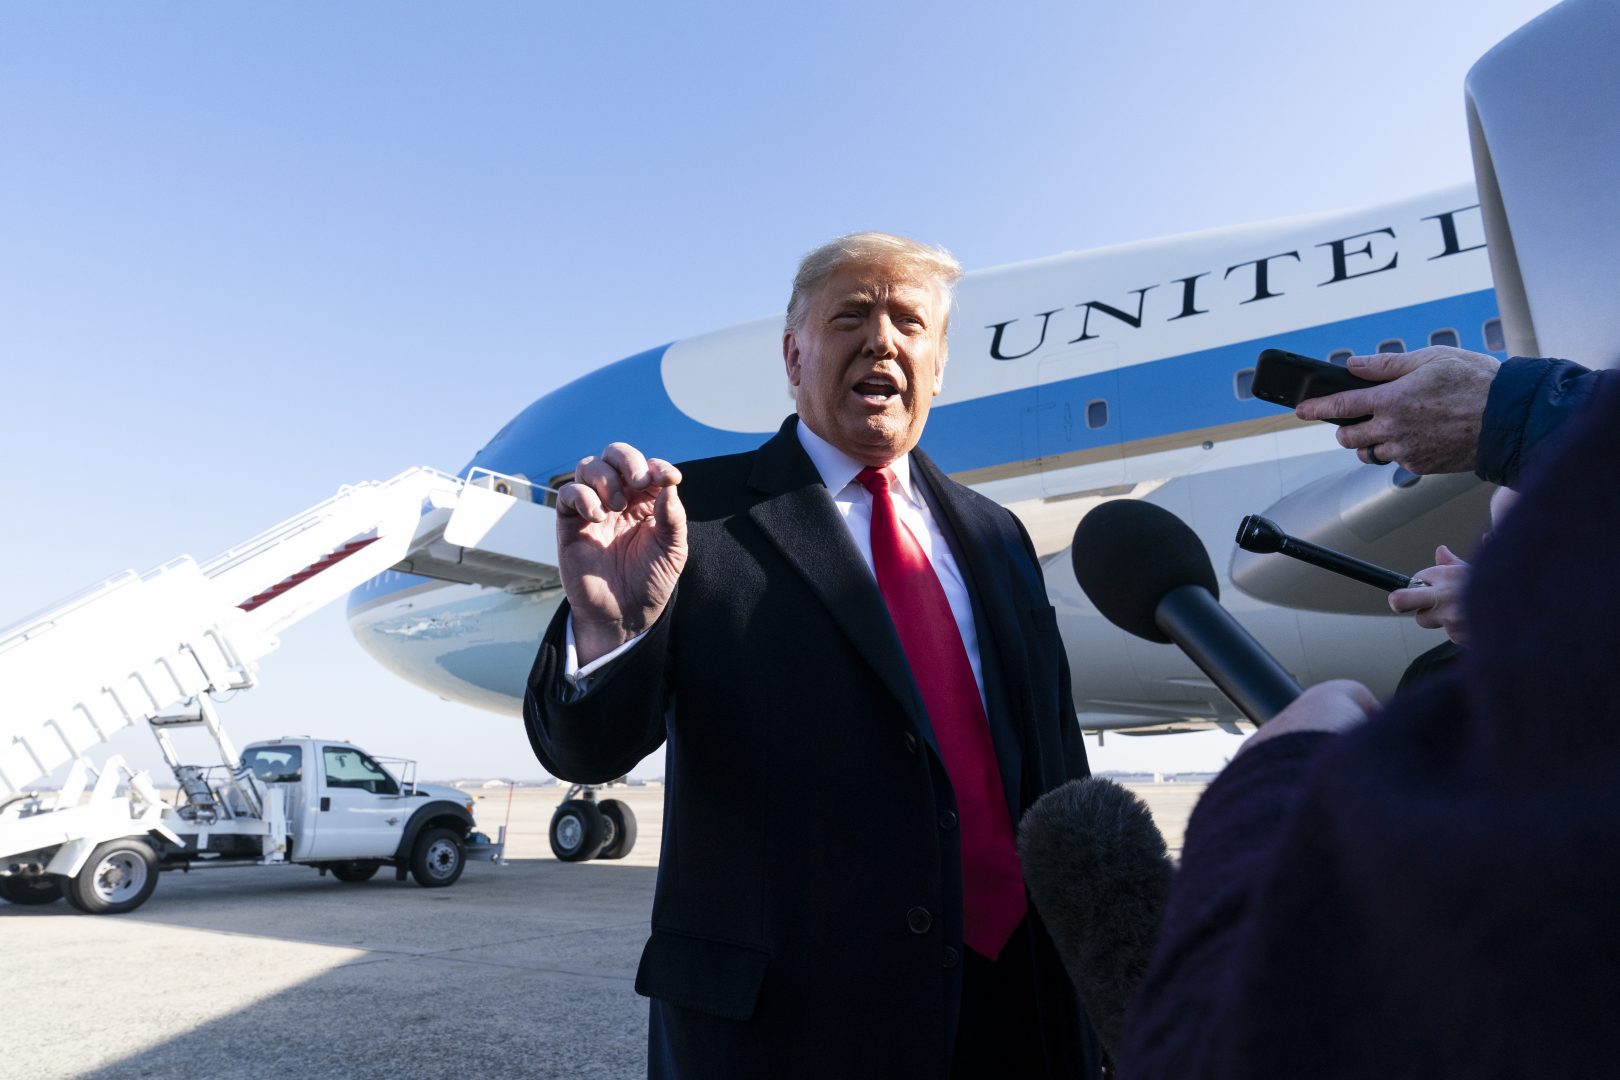 President Donald Trump speaks with reporters before boarding Air Force One upon departure, Tuesday, Jan. 12, 2021, at Andrews Air Force Base, Md.